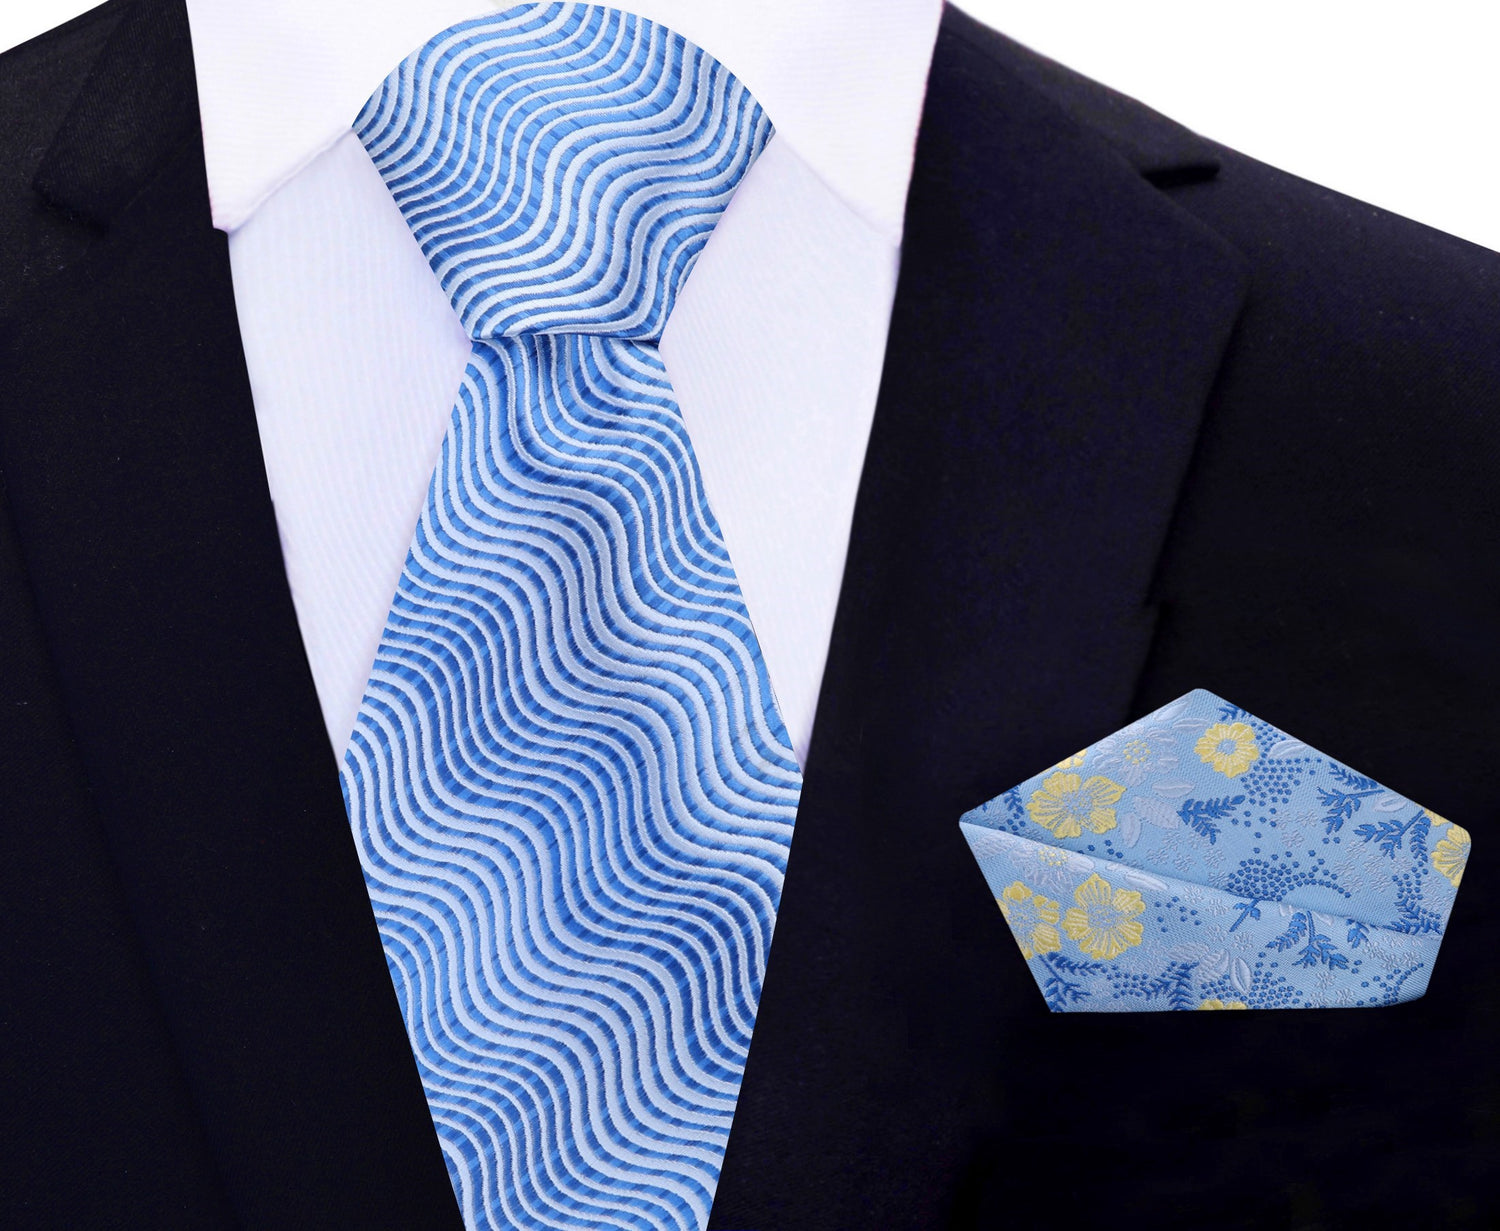 Shades of Blue Wavy Lines Necktie with Shades of Blue and Yellow Floral Pocket Square